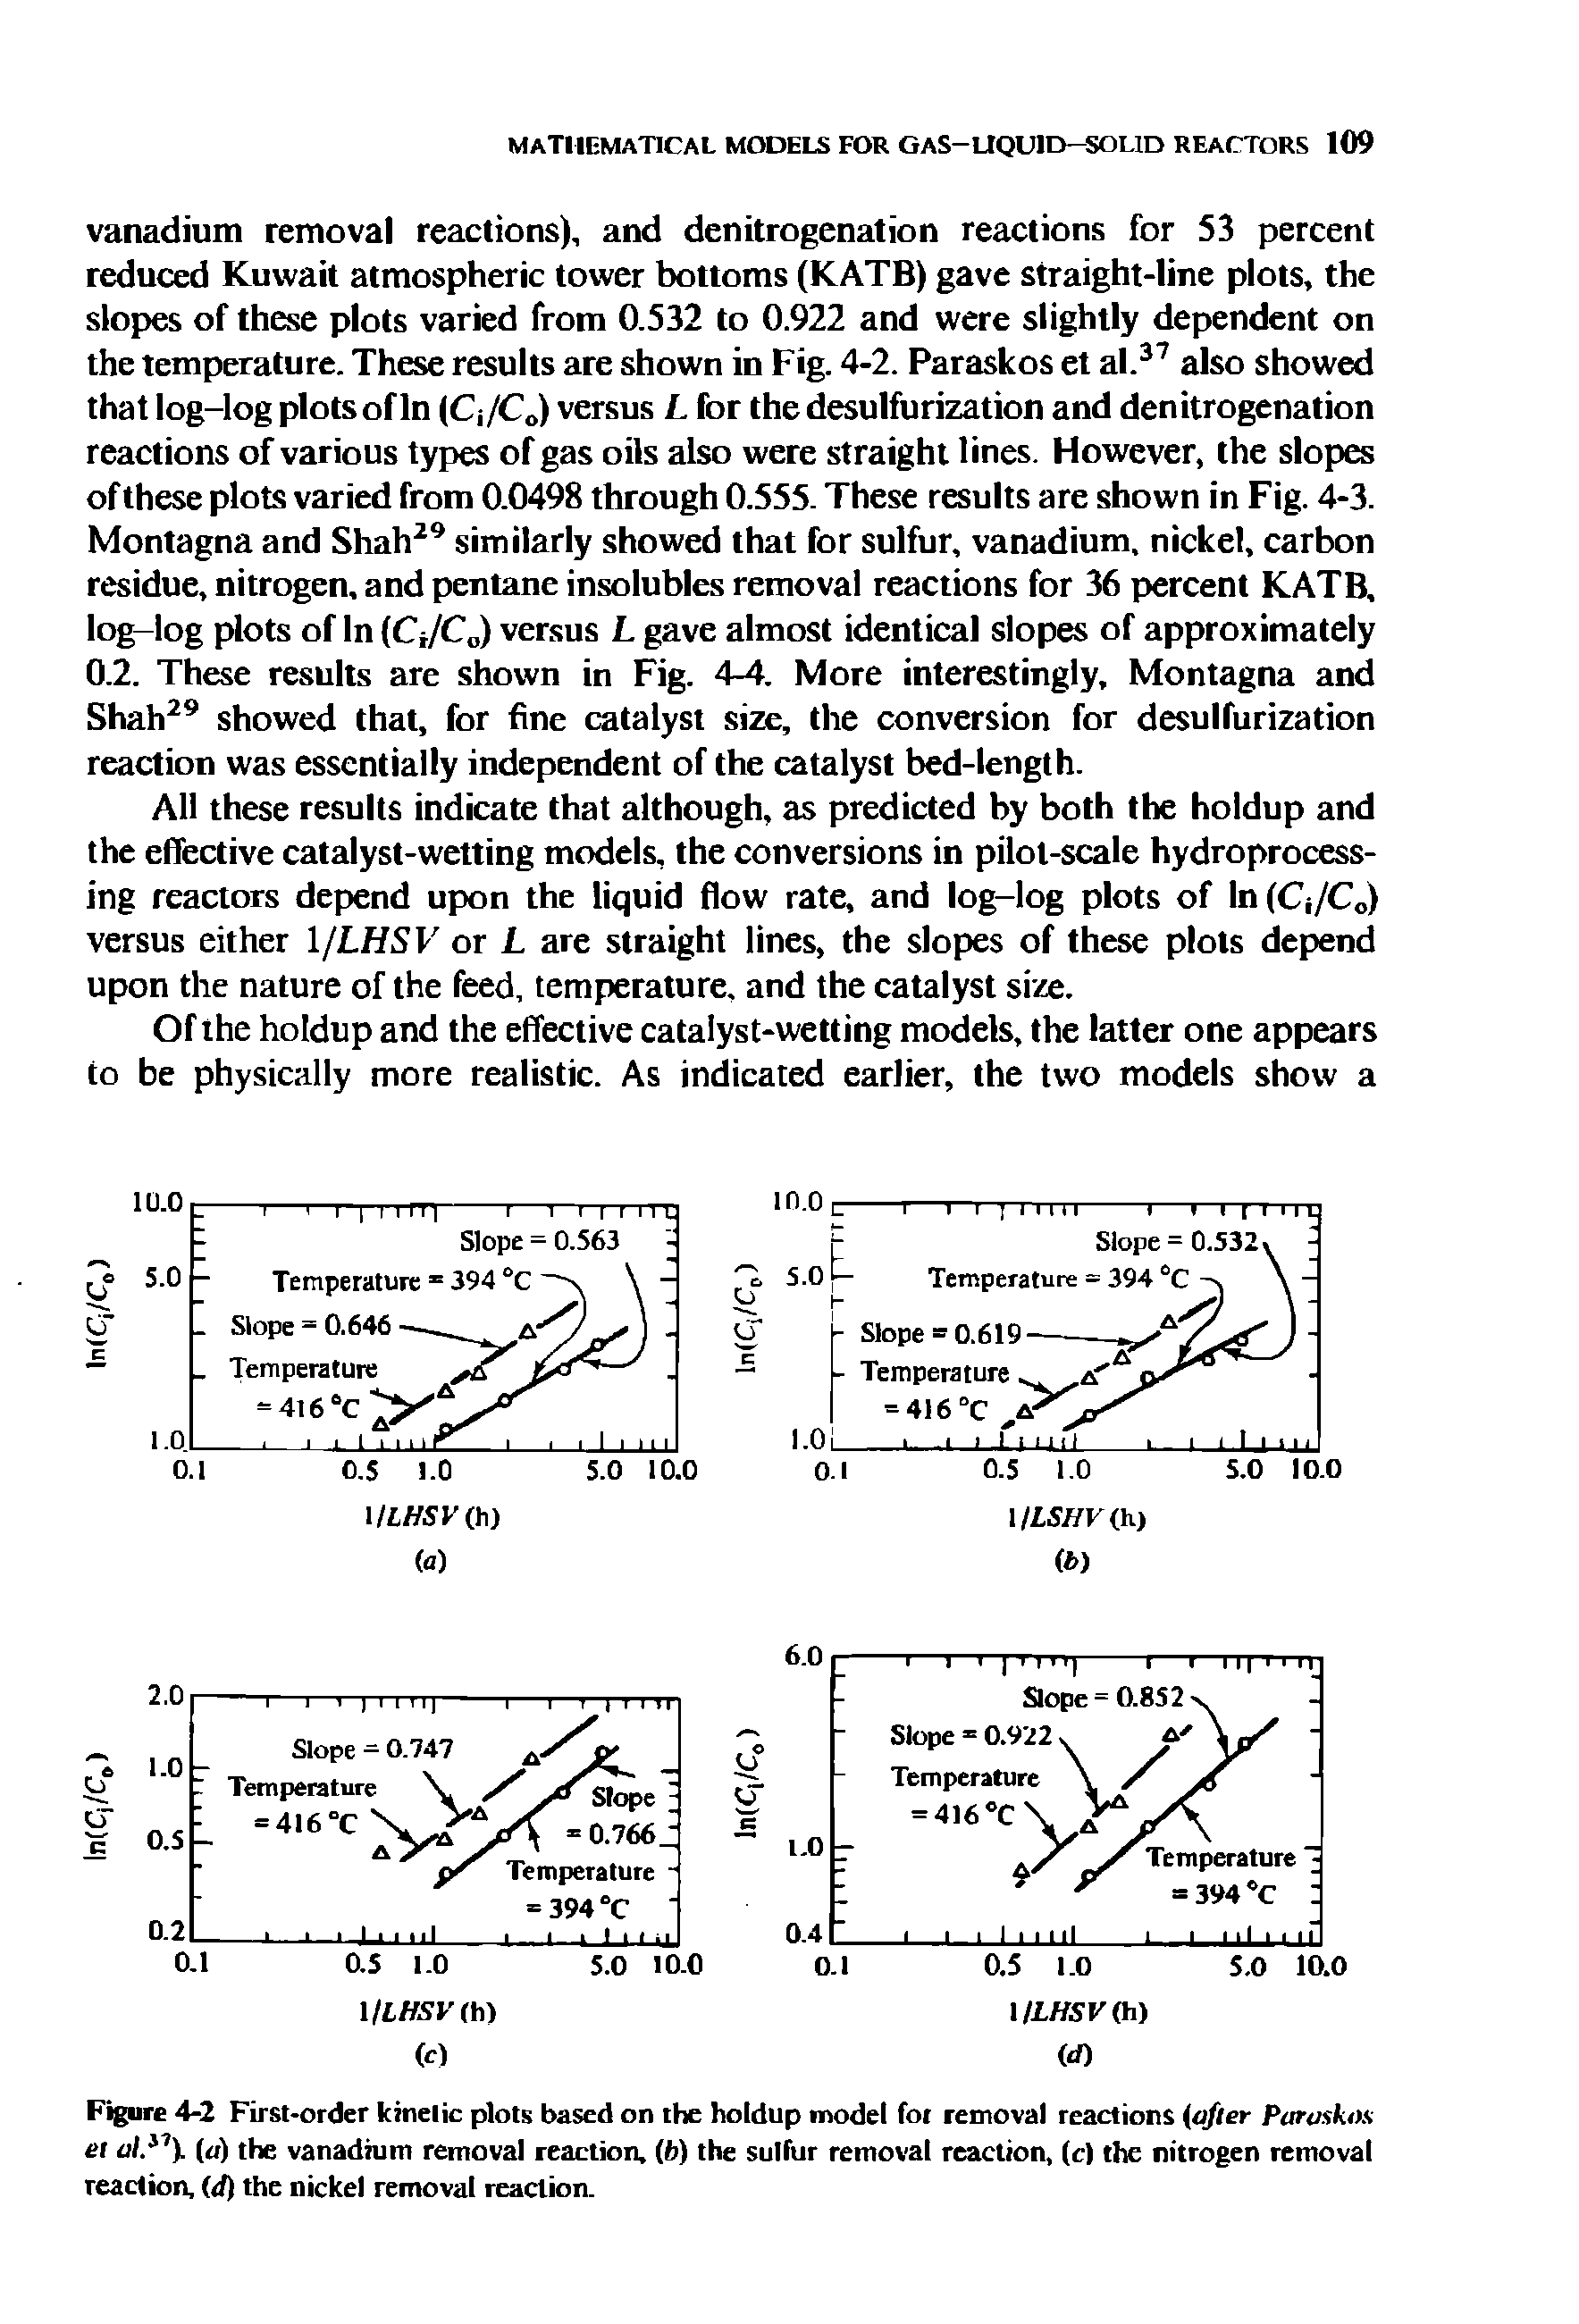 Figure 4-2 First-order kinetic plots based on the holdup model fot removal reactions (after Paraskox et al. 1). (a) the vanadium removal reaction, (ft) the sulfur removal reaction, (c) the nitrogen removal reaction, (d) the nickel removal reaction.